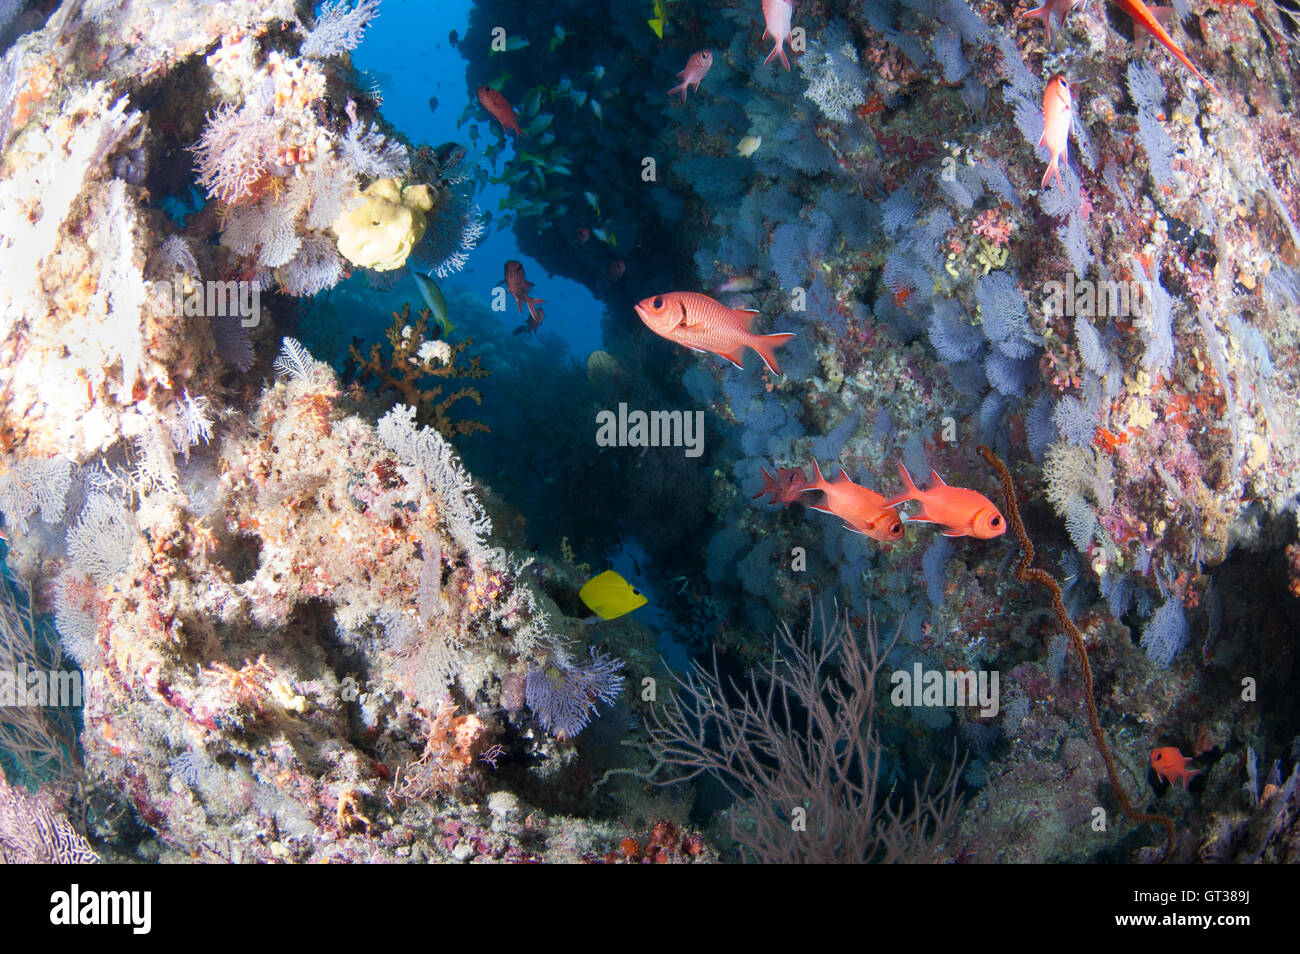 opening in the reef with diverse marine life in kuda rah thila, maldives Stock Photo